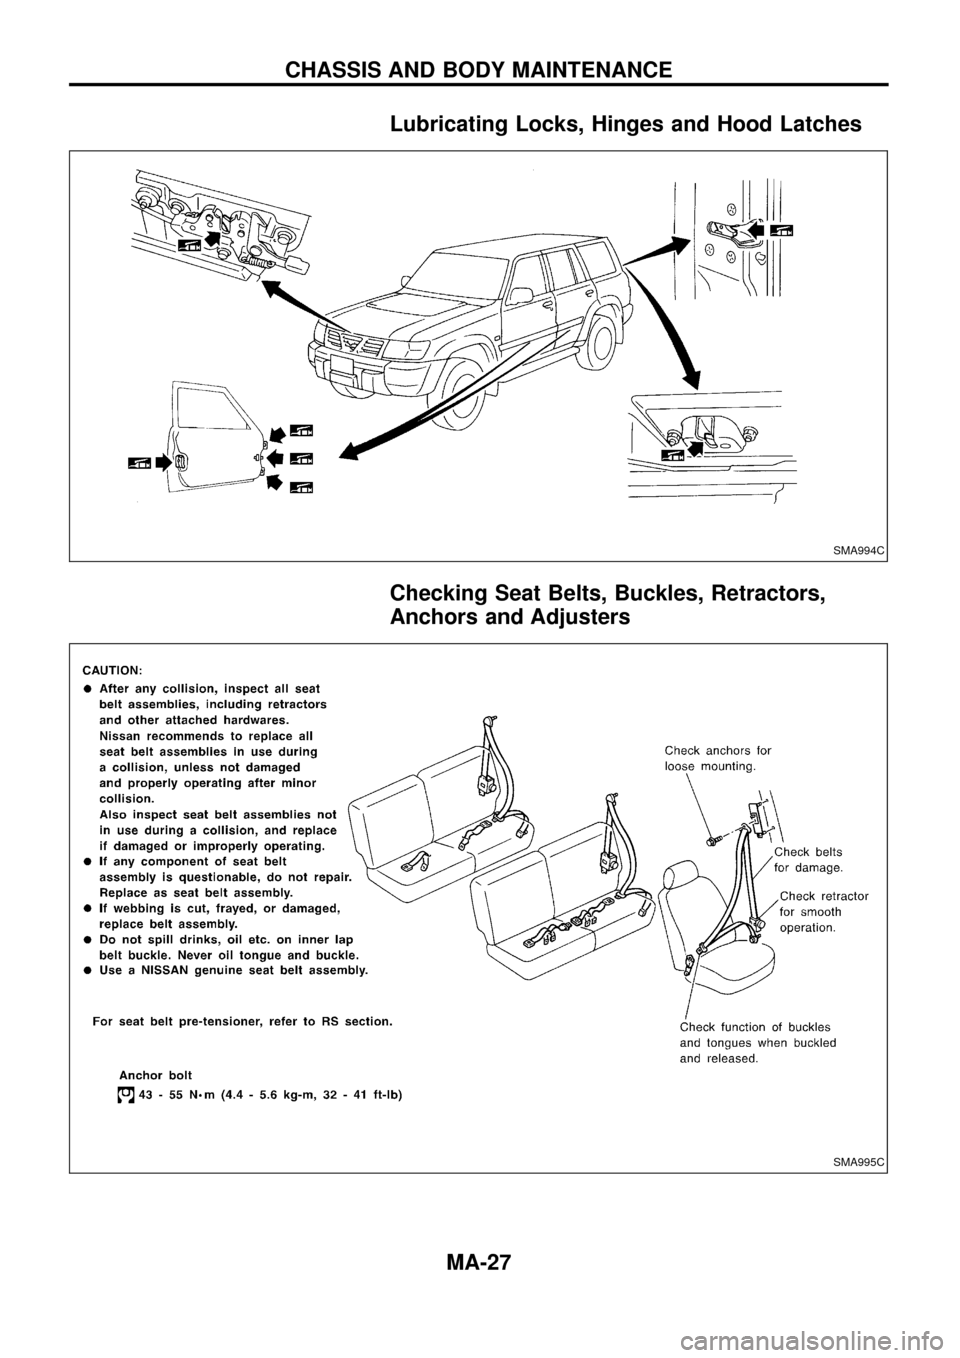 NISSAN PATROL 1998 Y61 / 5.G Maintenance Workshop Manual Lubricating Locks, Hinges and Hood Latches
Checking Seat Belts, Buckles, Retractors,
Anchors and Adjusters
SMA994C
SMA995C
CHASSIS AND BODY MAINTENANCE
MA-27 